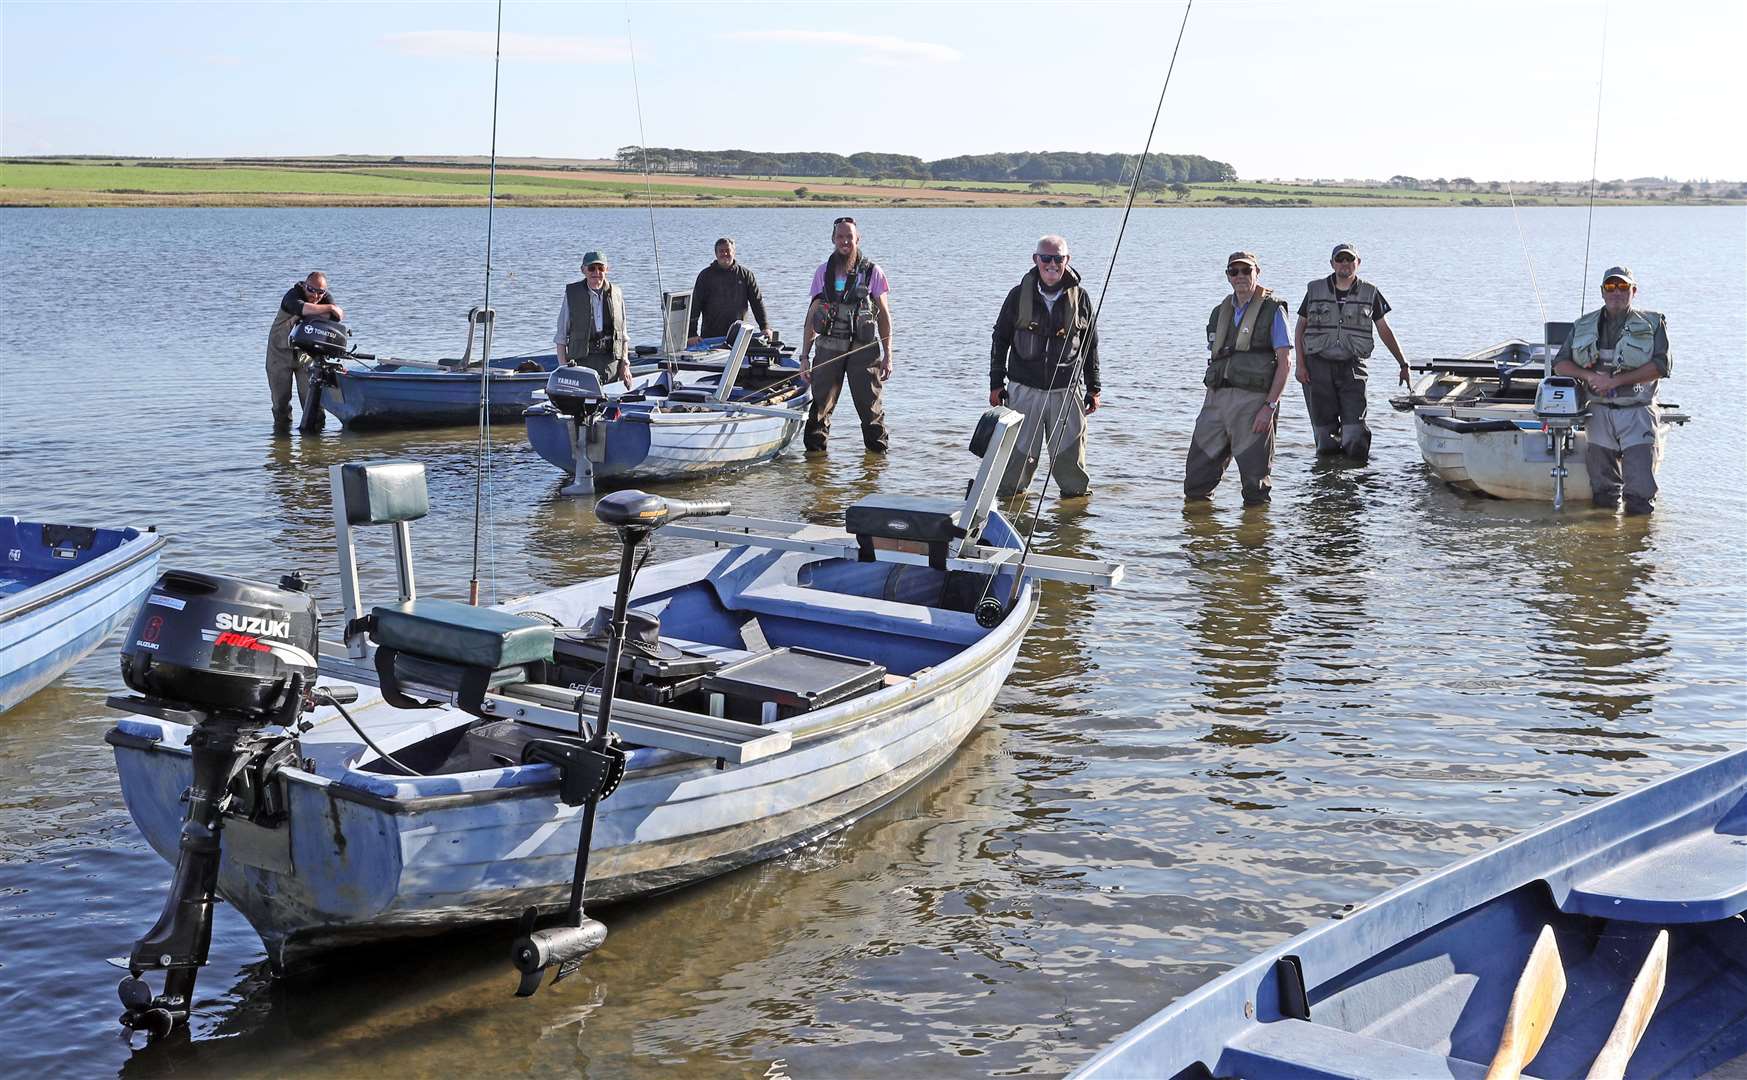 Members of Dounreay Fly Fishing Association before their final Boat League competition of the season at Loch Watten. From left: Kevin Imlach, Bill Robertson, Callum Mackenzie, Aivis Kreslins, Neil Clyne, Peter Creasey, Michael Skerrit and Robbie Hawken. Picture: James Gunn